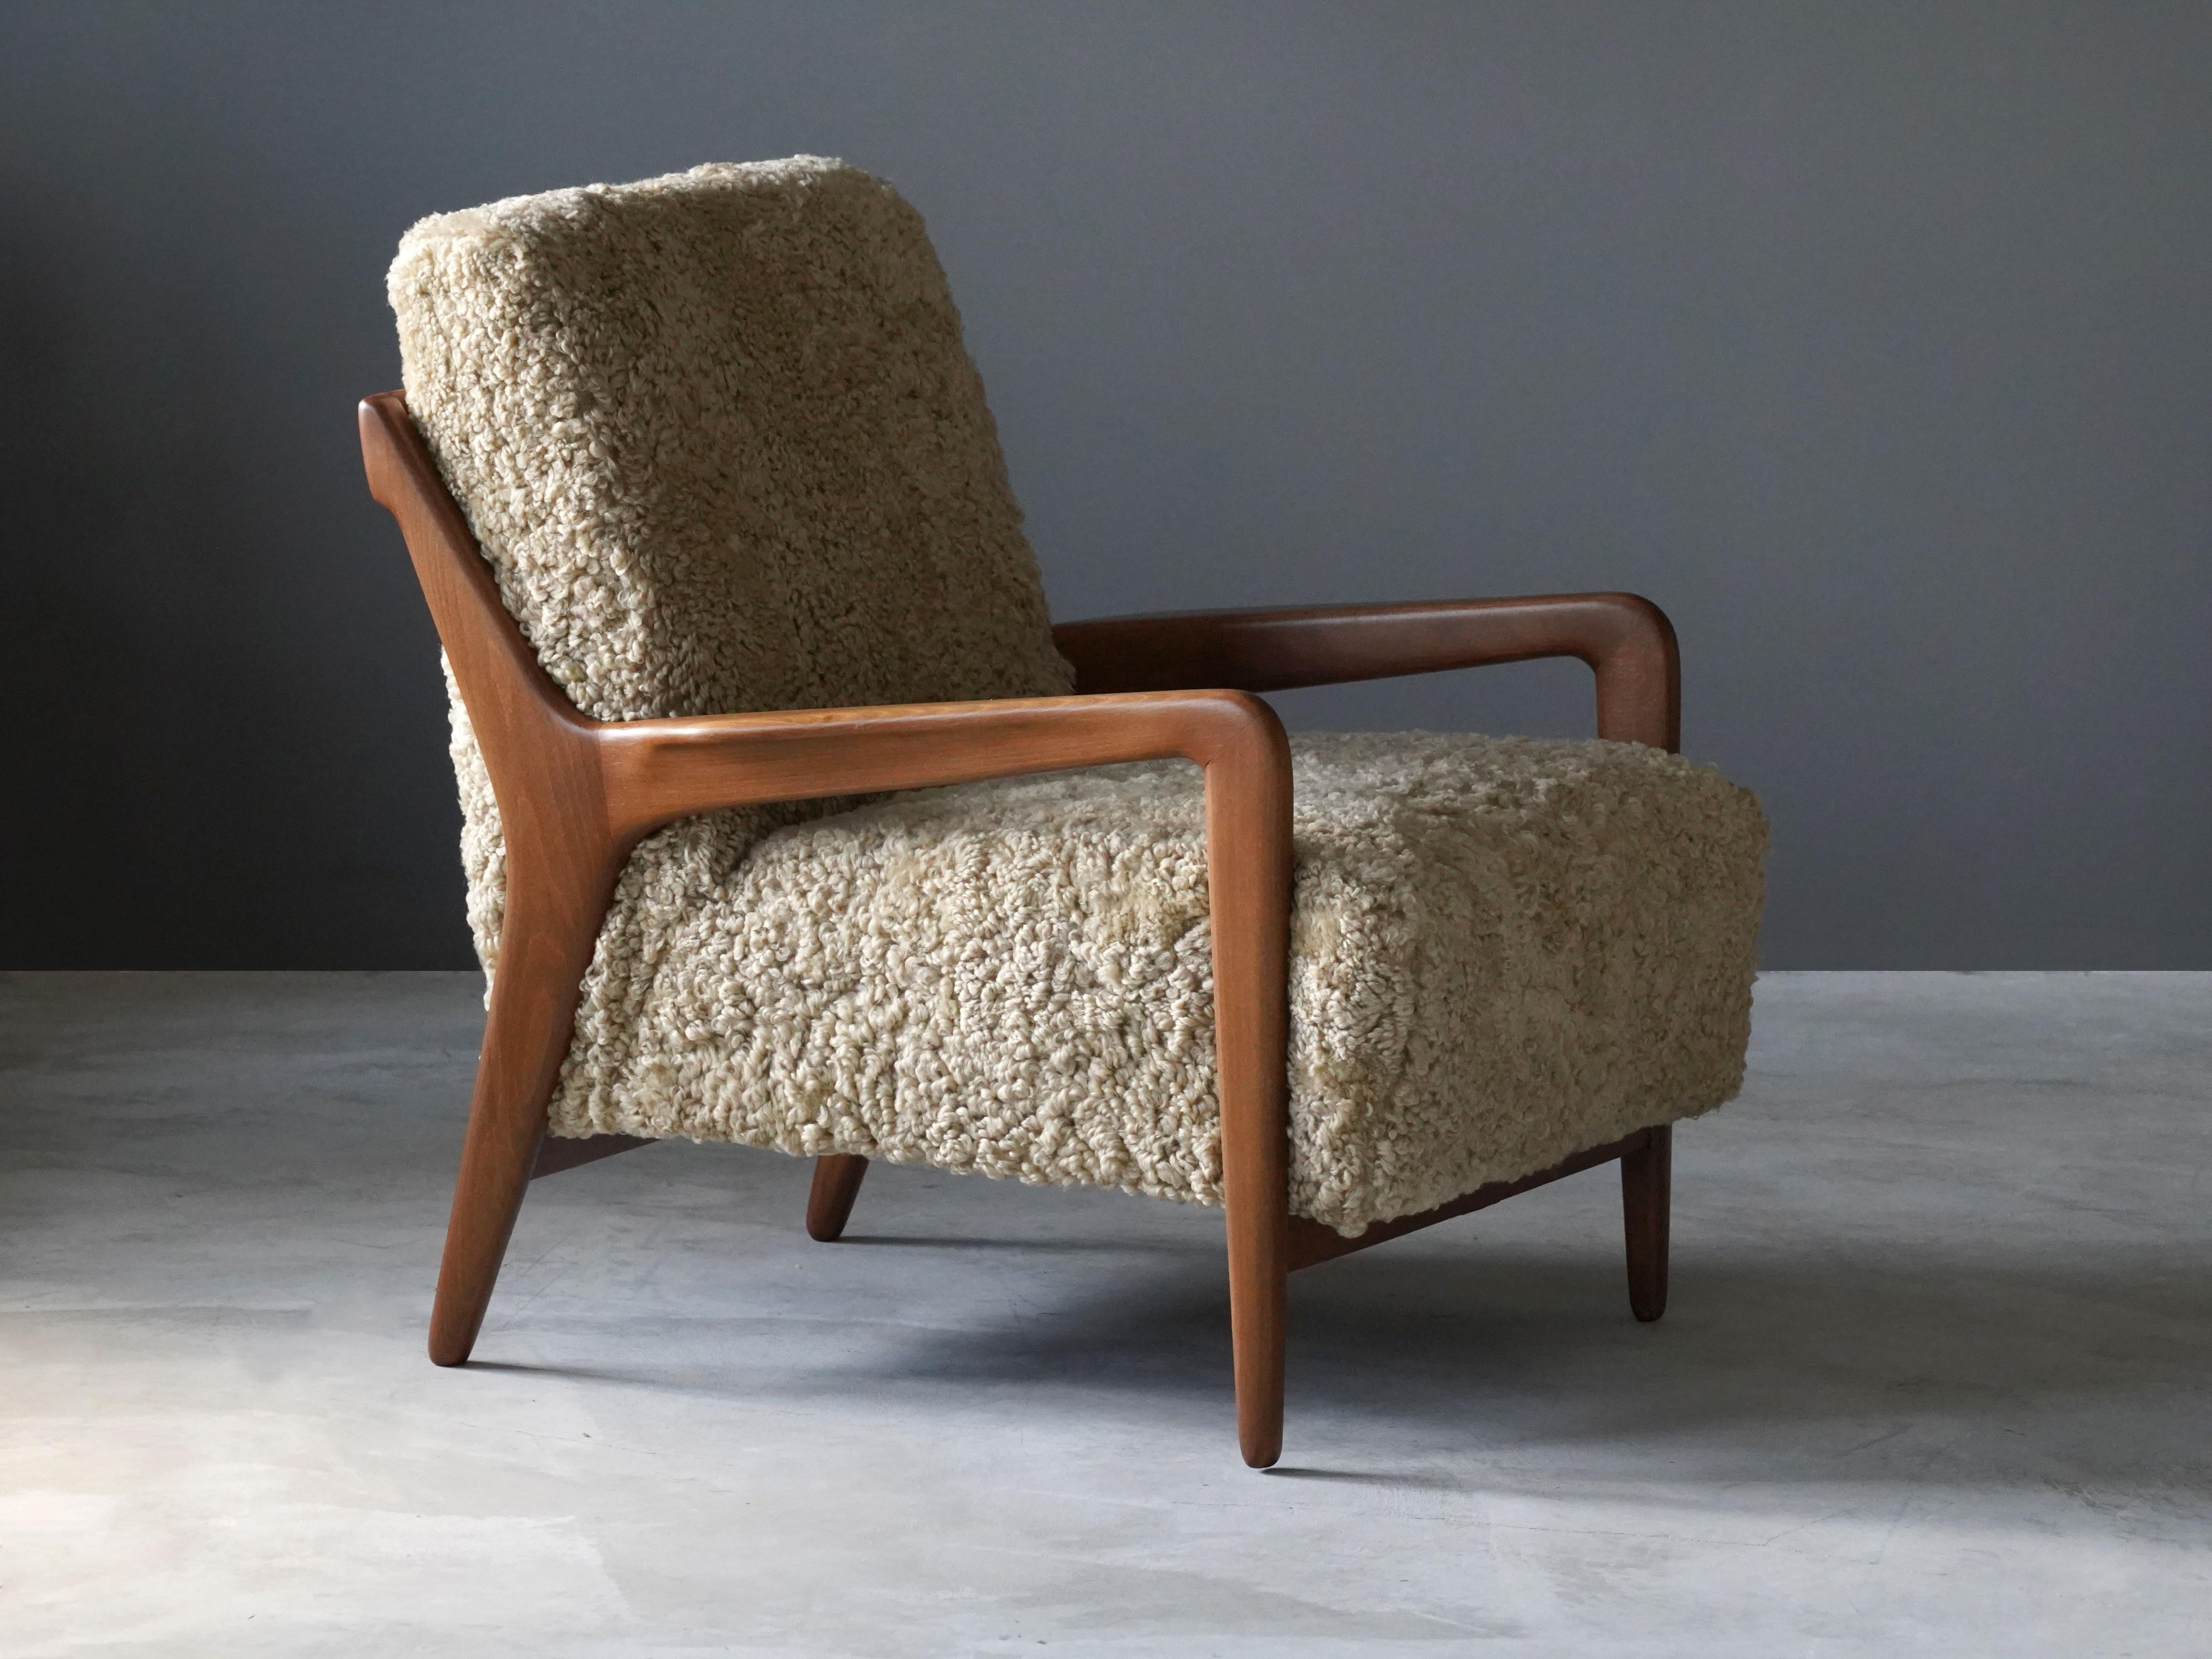 A lounge chair produced by Lucchini & Lissone, Italy, 1950s. The organically sculpted beech frame is paired with the overstuffed seat, with its softness further enhanced by sheepskin upholstery. 

Other identical examples have been uncovered bearing